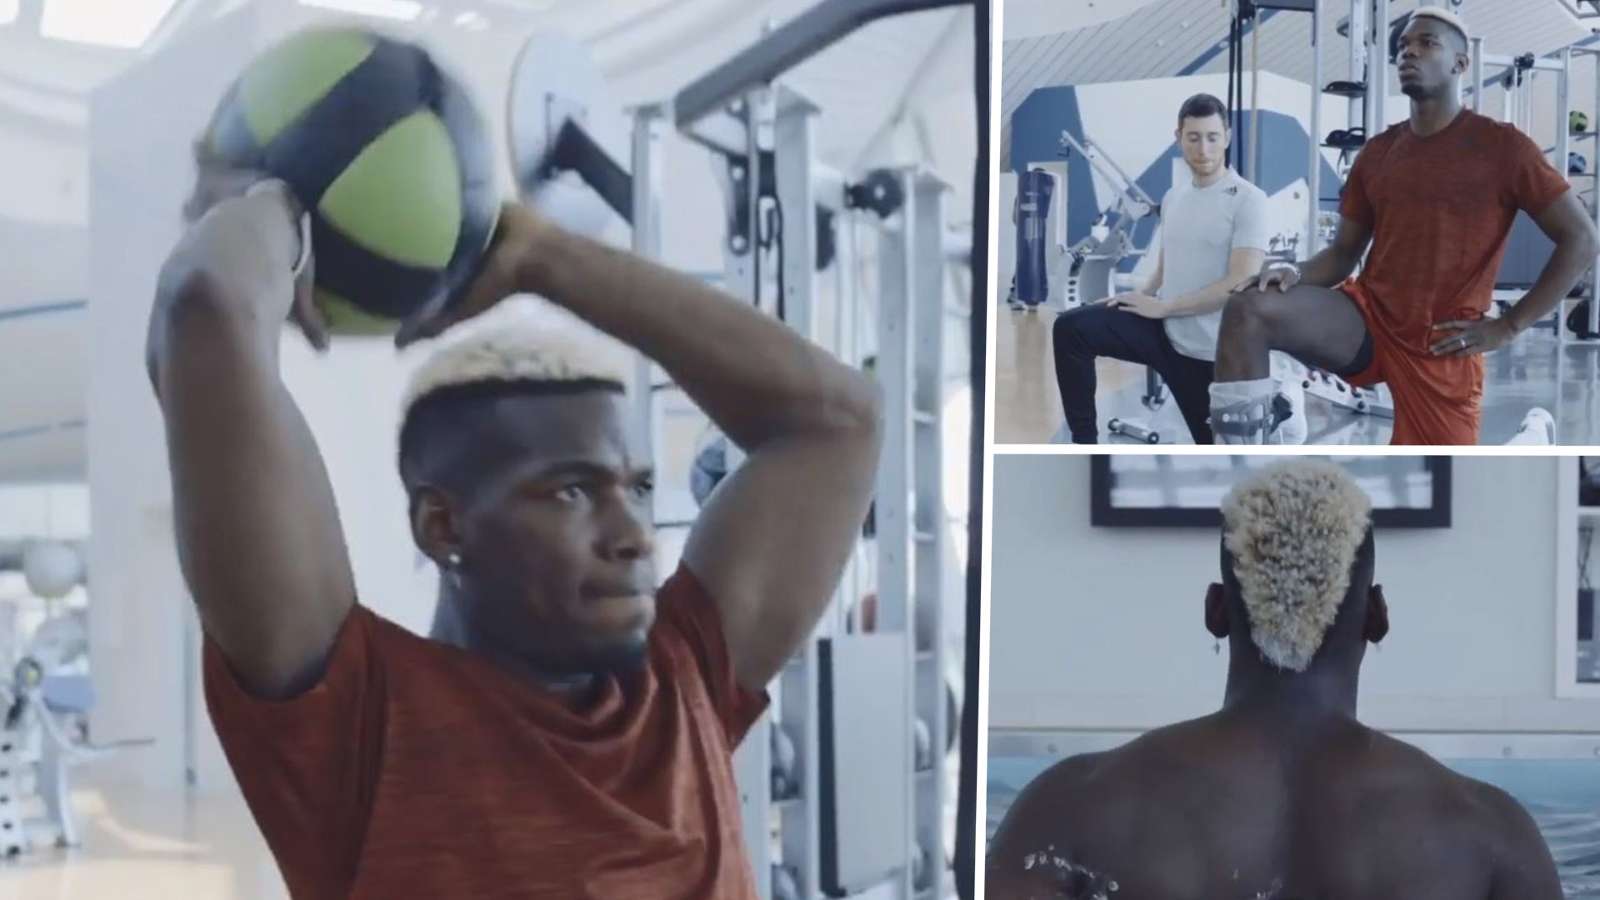 'Slowly but surely' - Man Utd star Pogba posts workout video as he steps up return from ankle injury - Bóng Đá